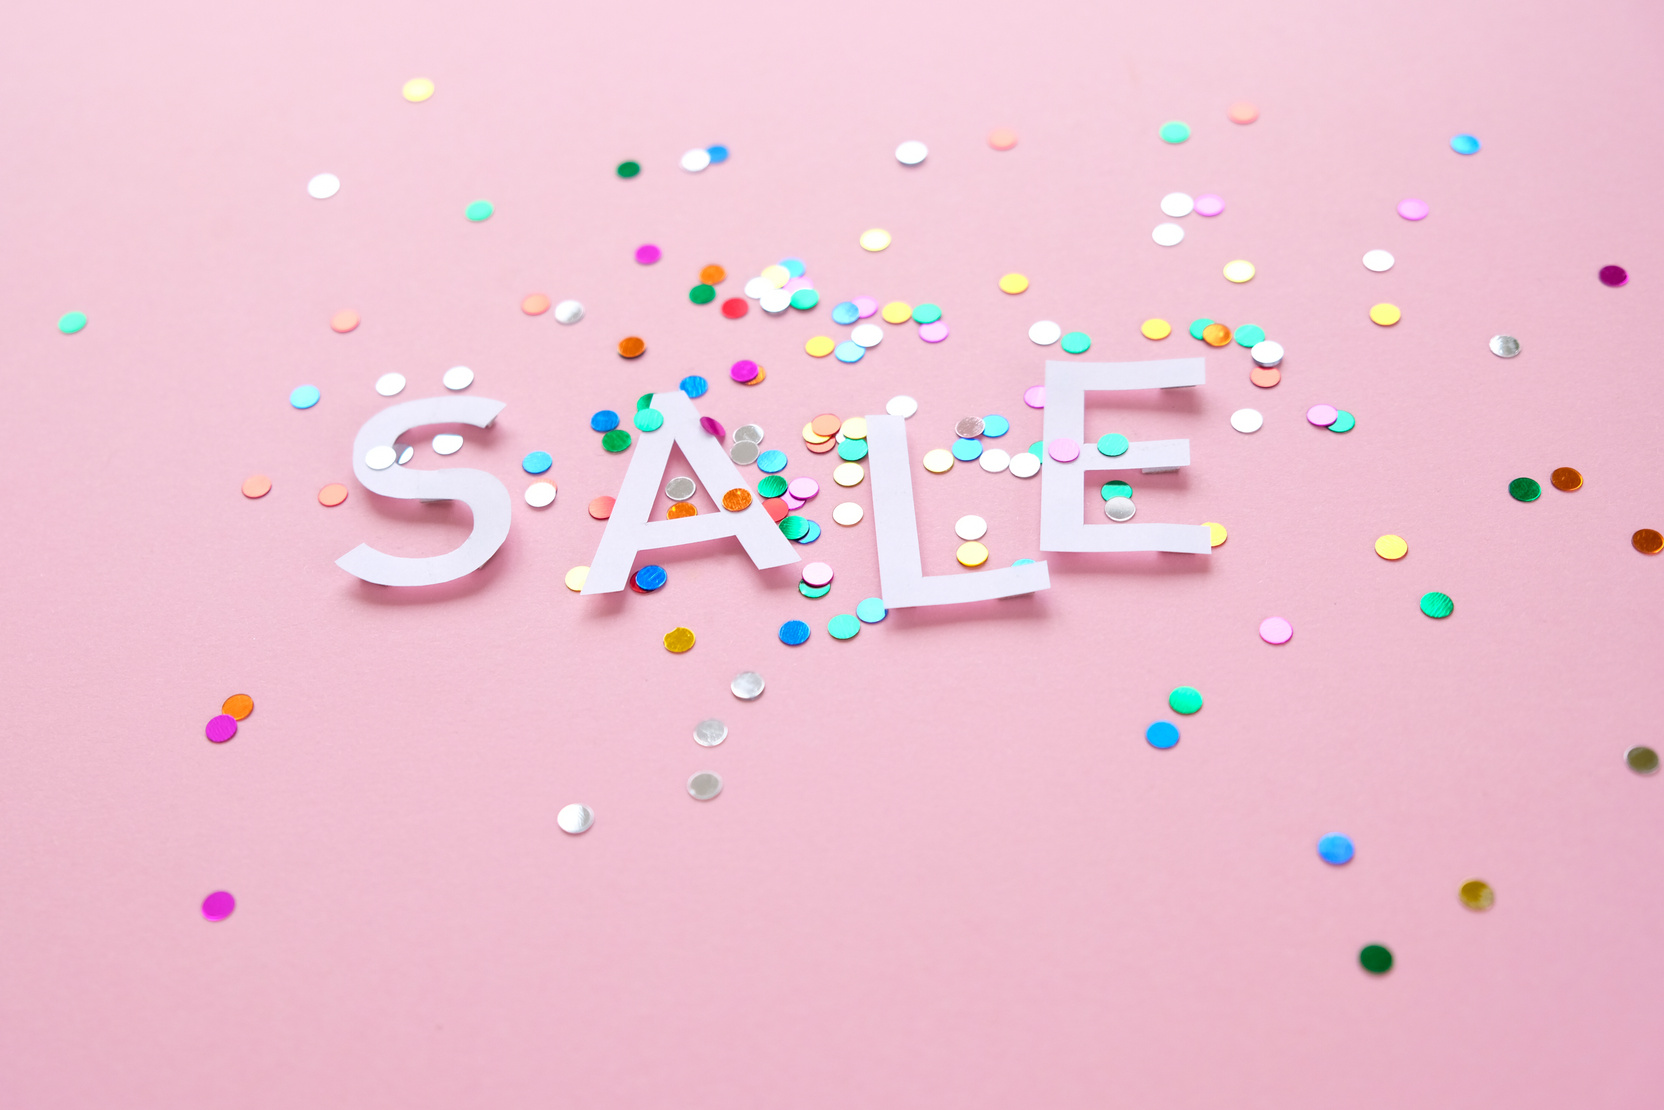 Sale with colorful confetti on pink background